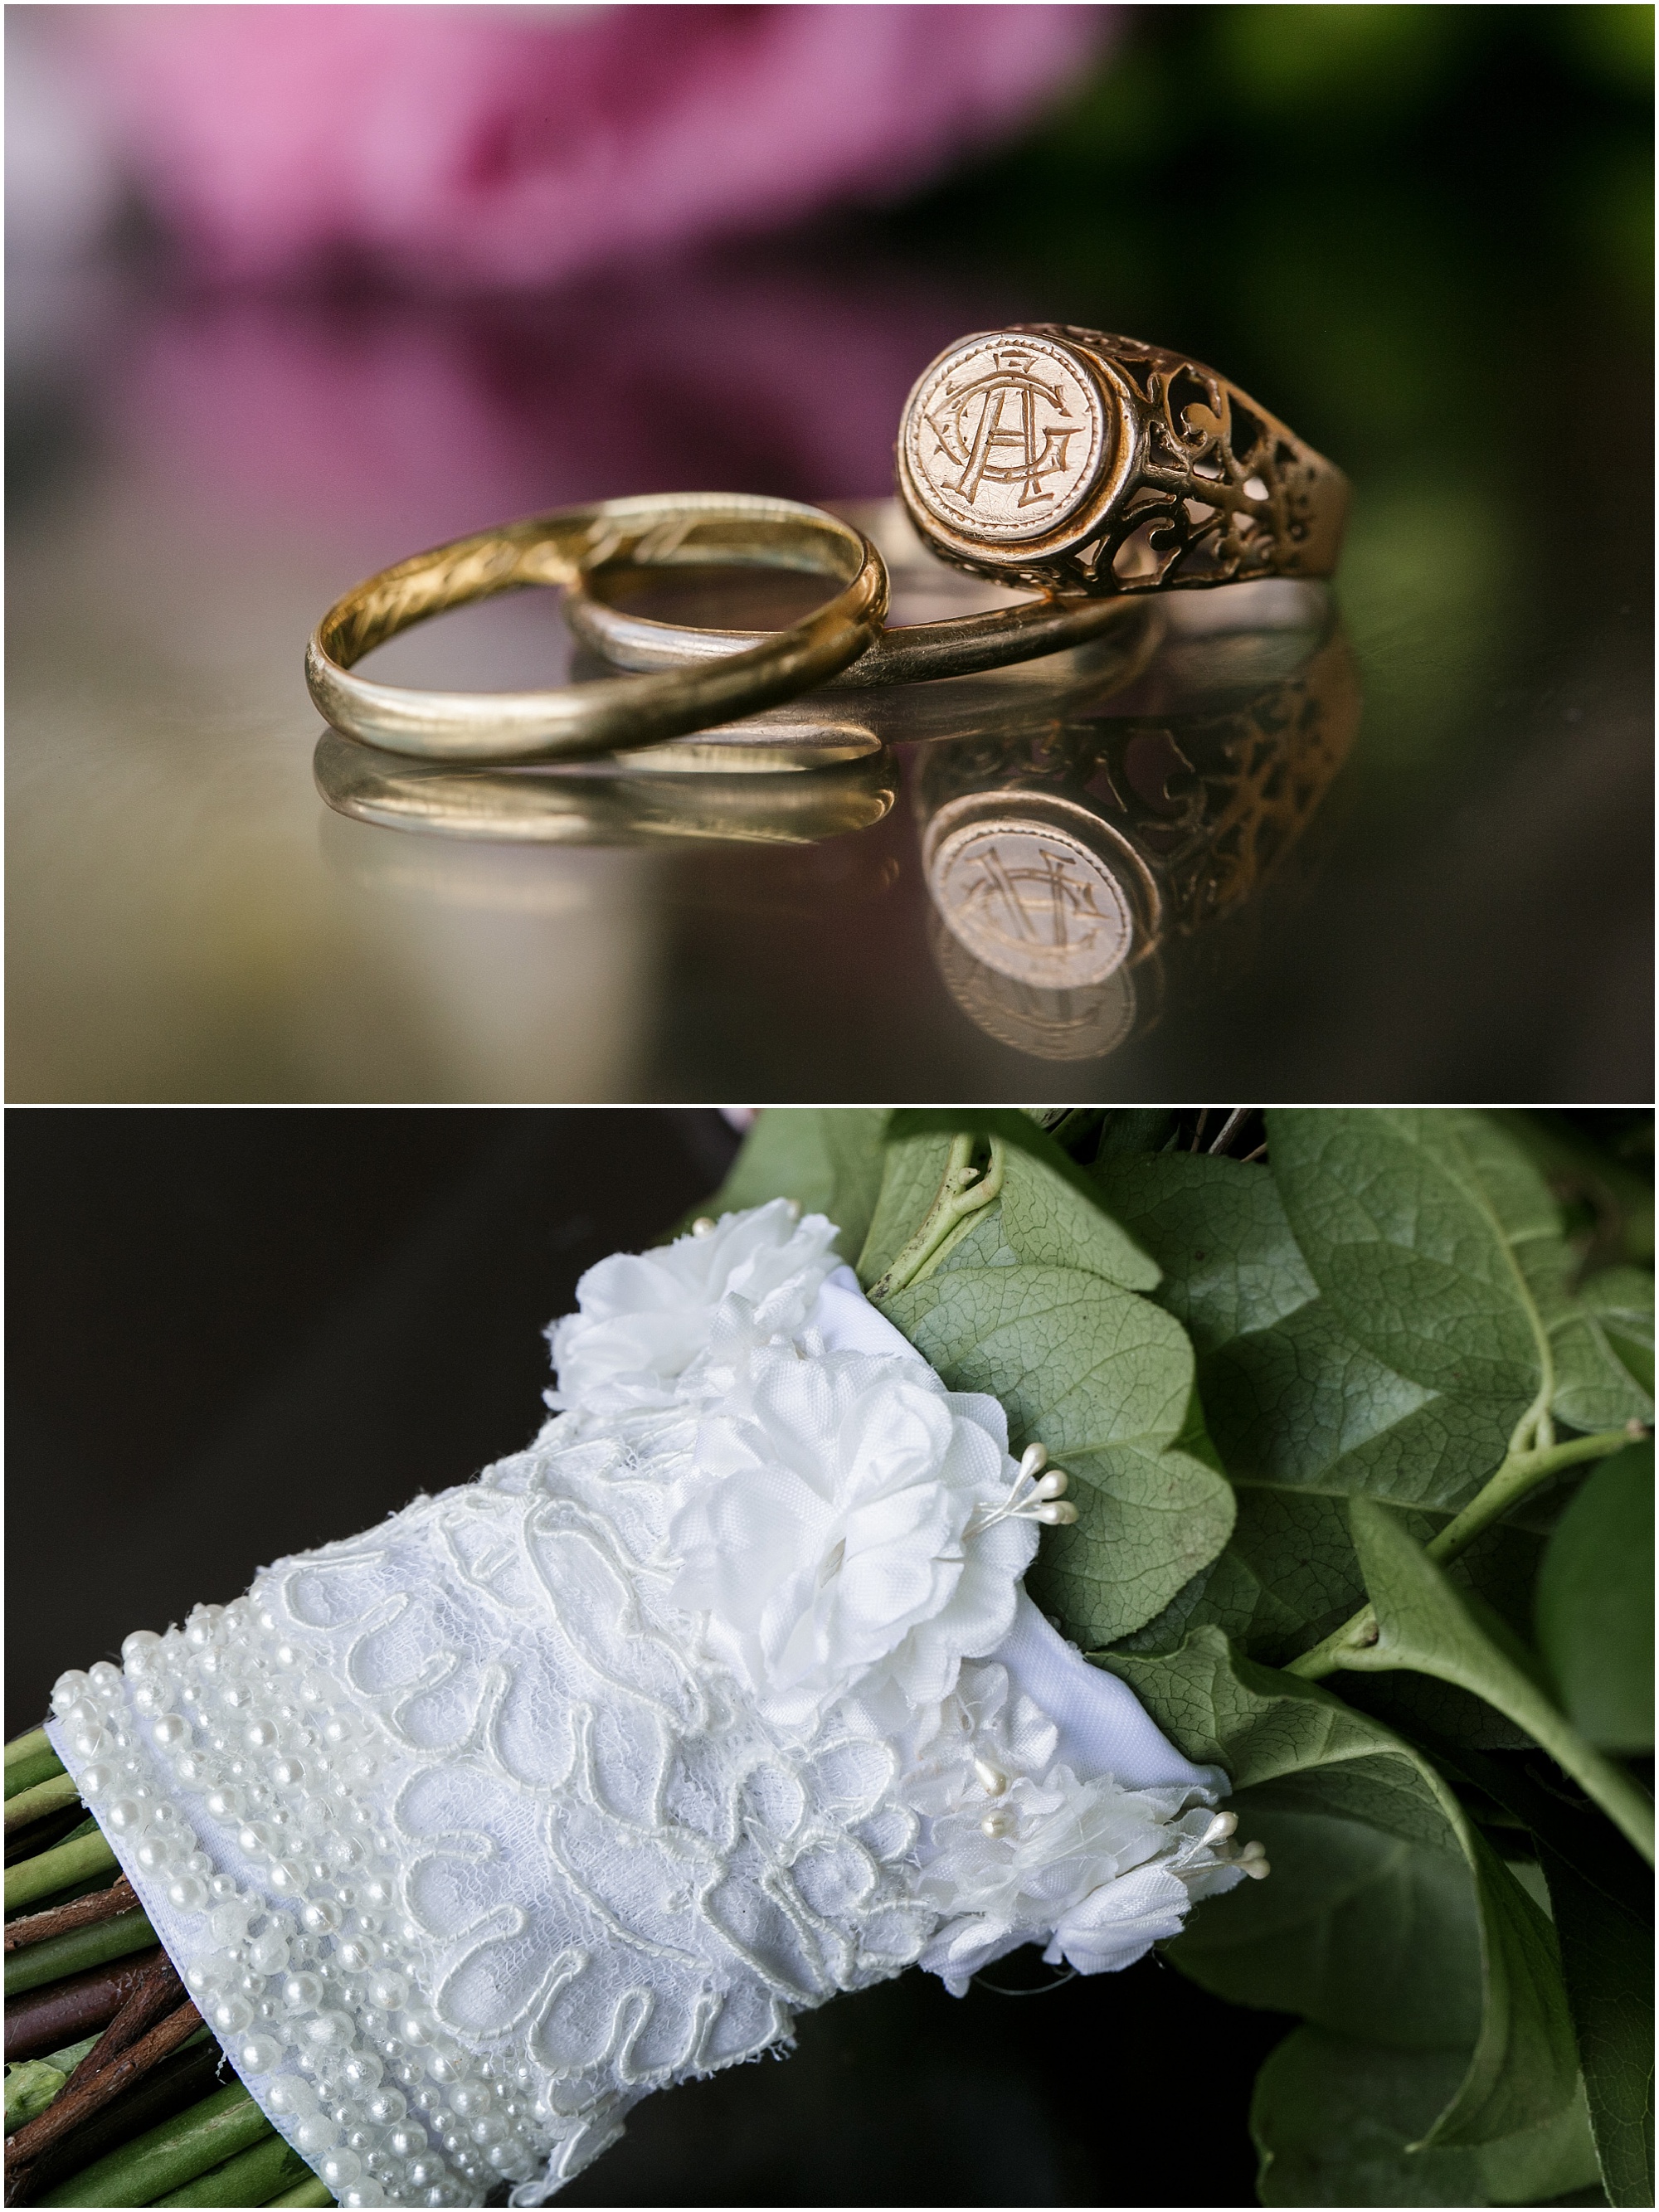 Heirloom rings and bouquet stem wrapped with lace from bride's mother's veil.